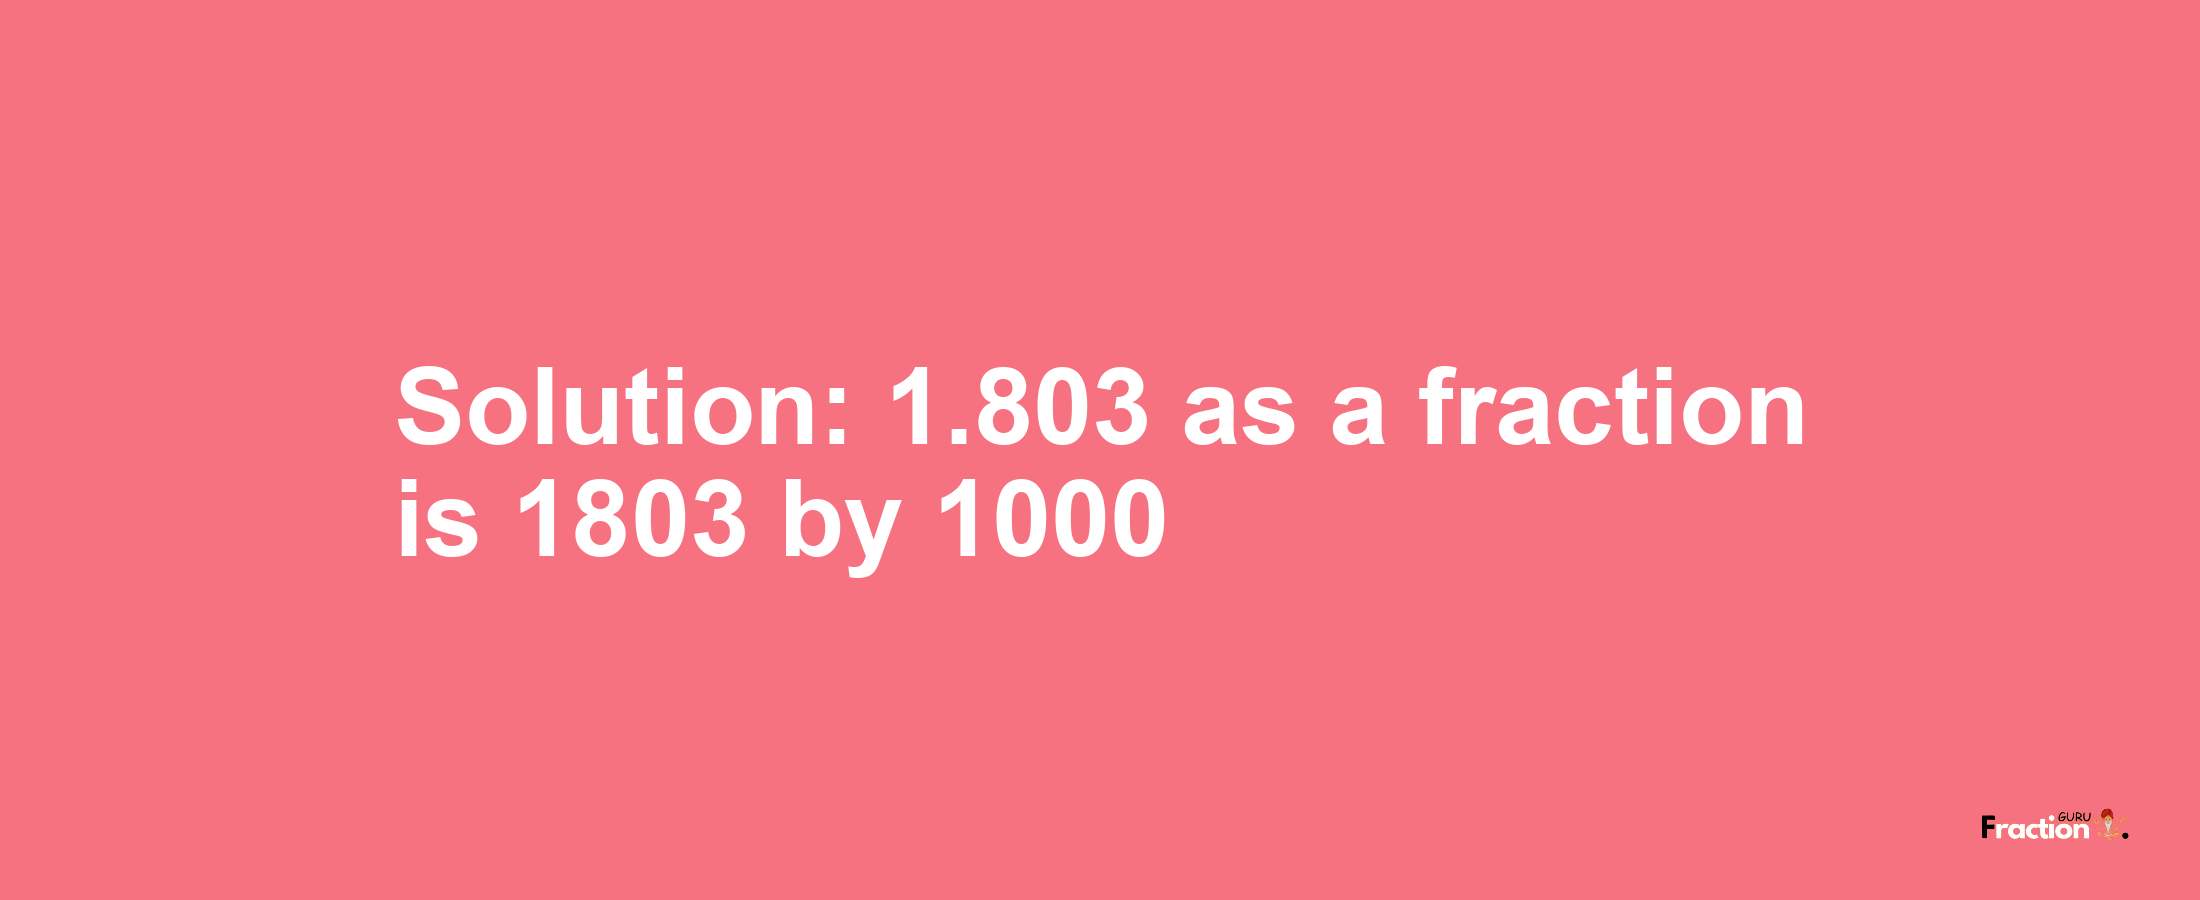 Solution:1.803 as a fraction is 1803/1000